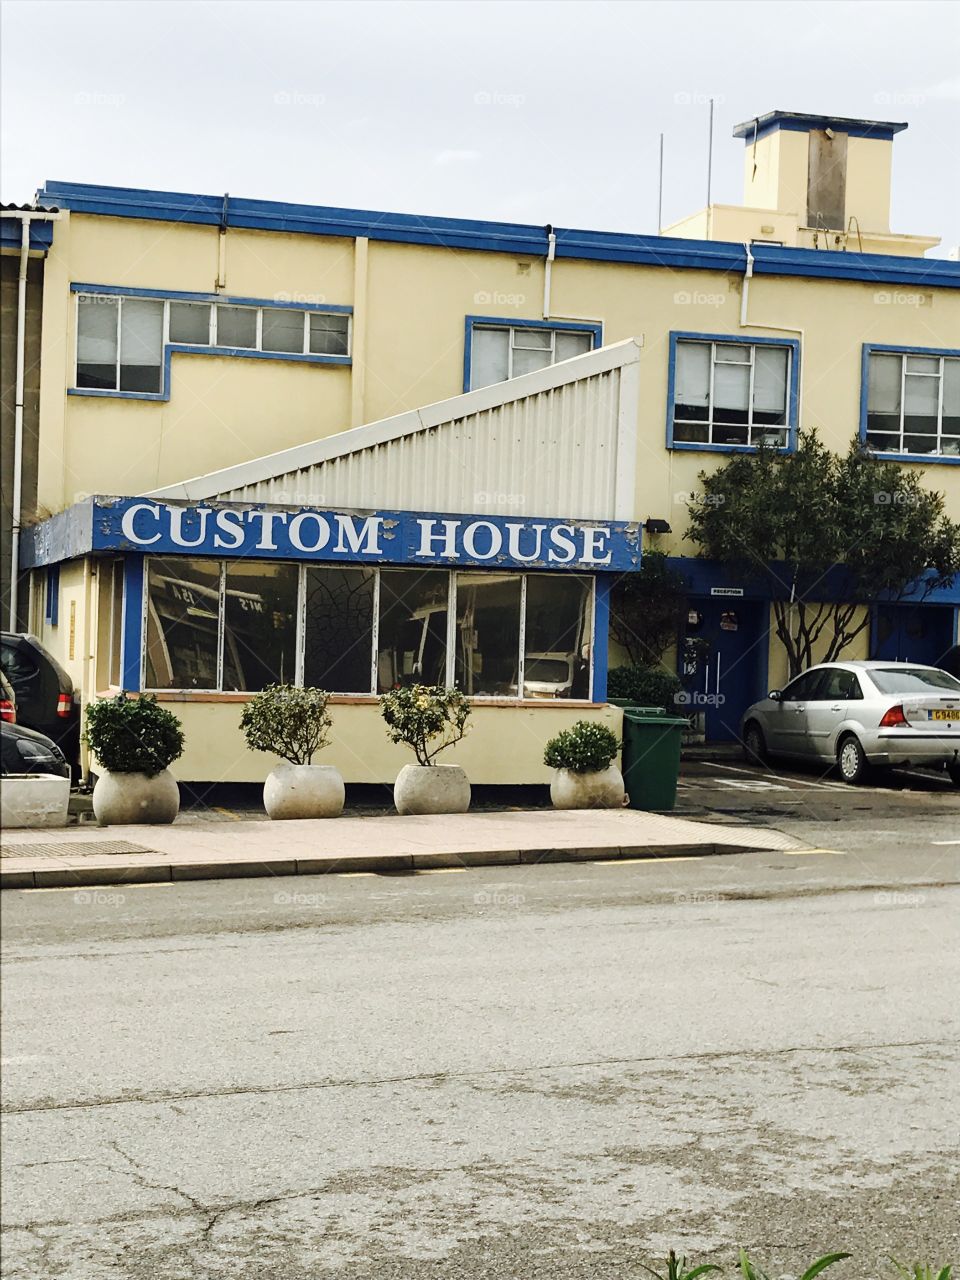 Customs-government-building-